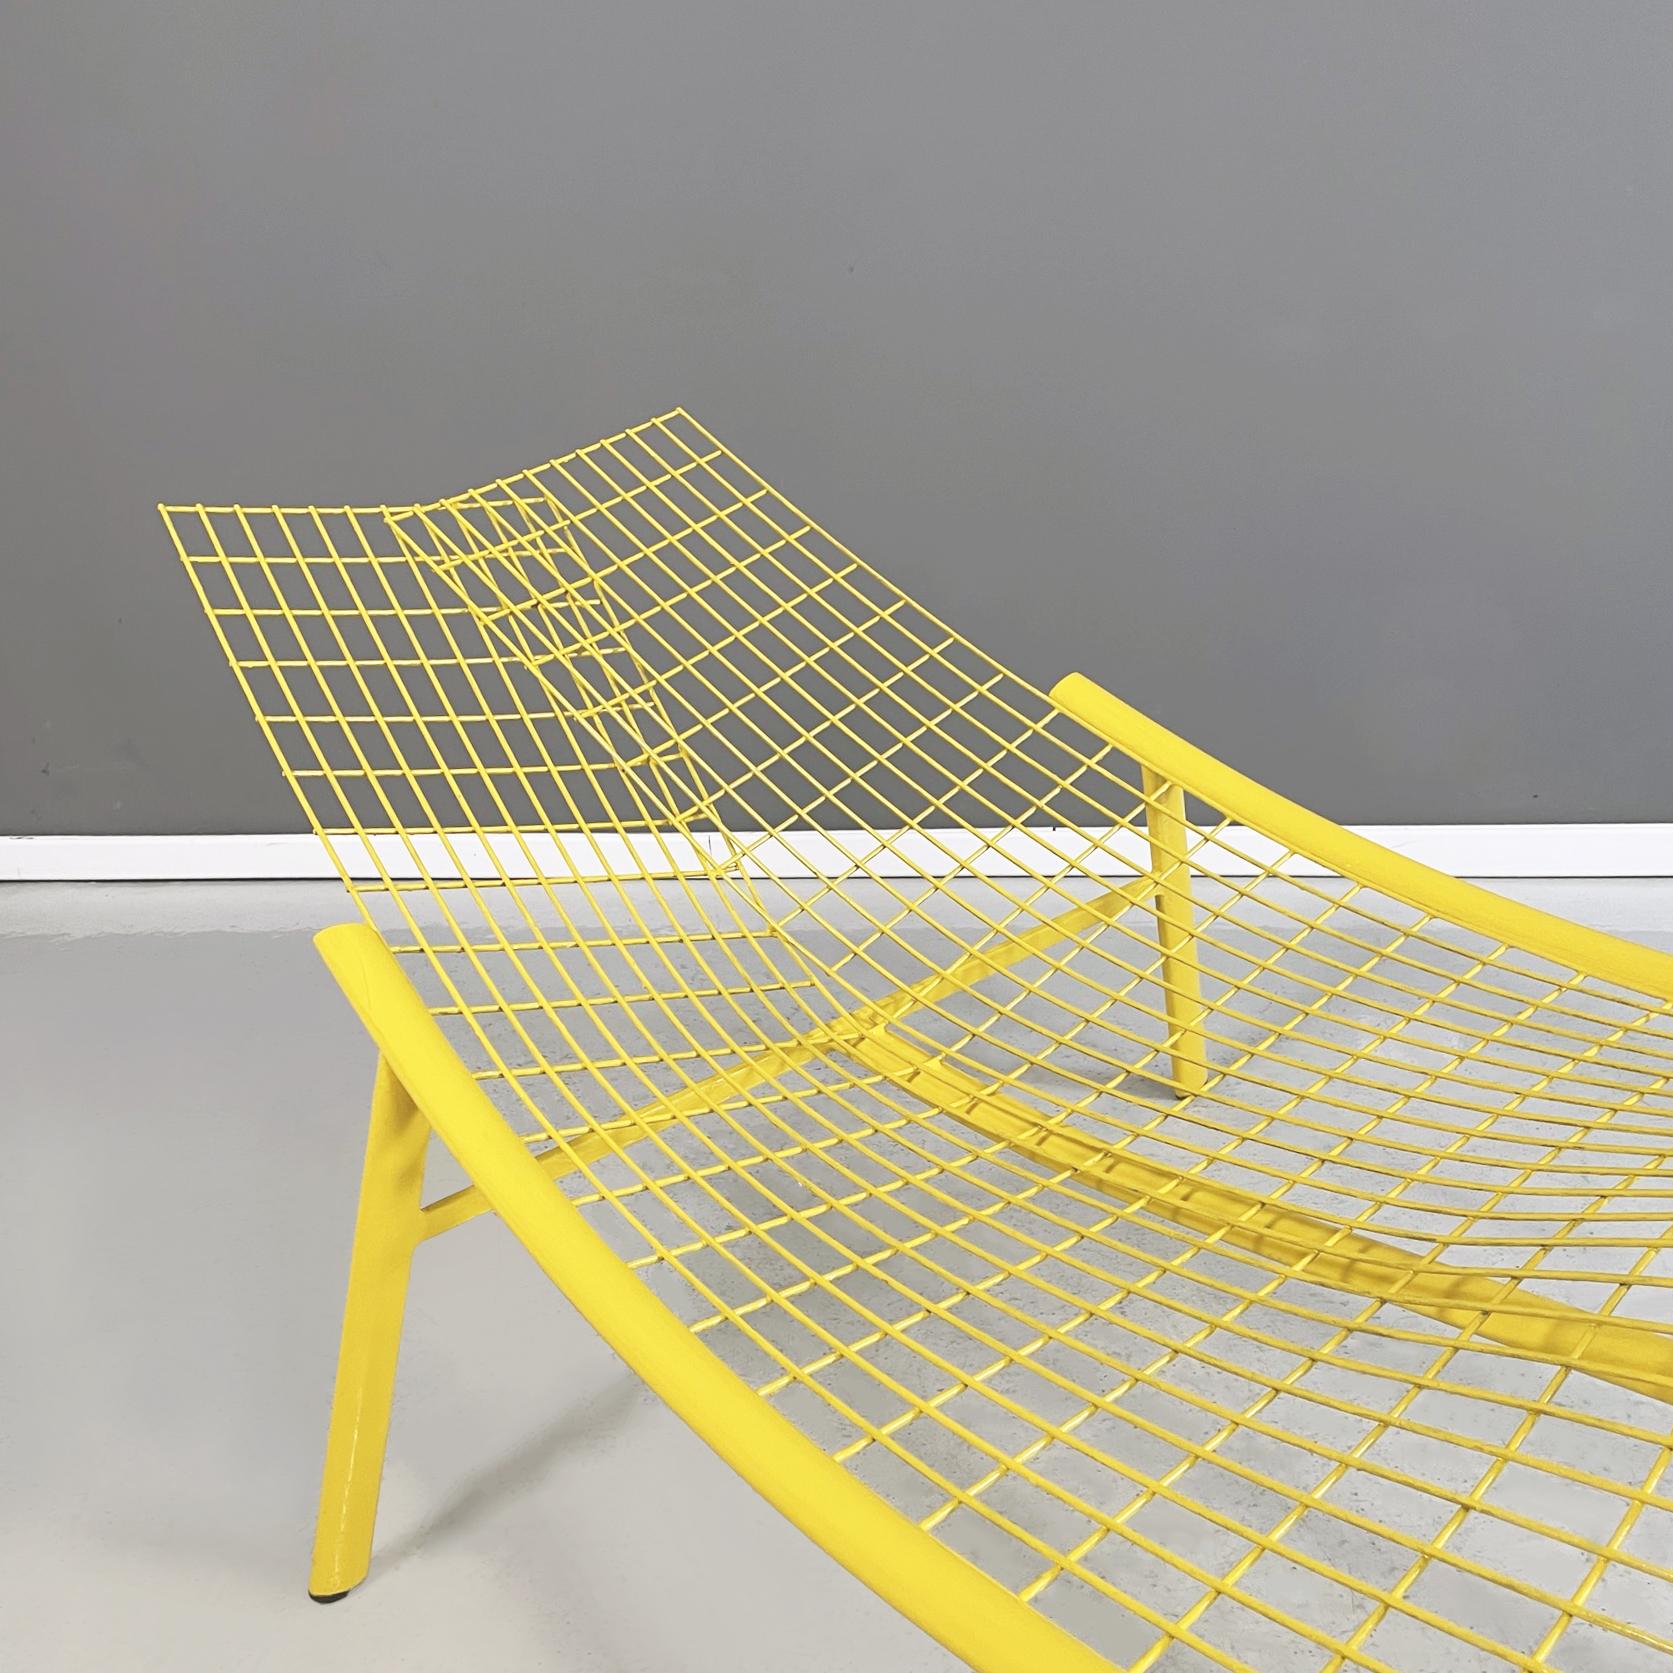 Late 20th Century Italian modern Yellow metal Deck chair Swing Rete by Offredi for Saporiti, 1980s For Sale